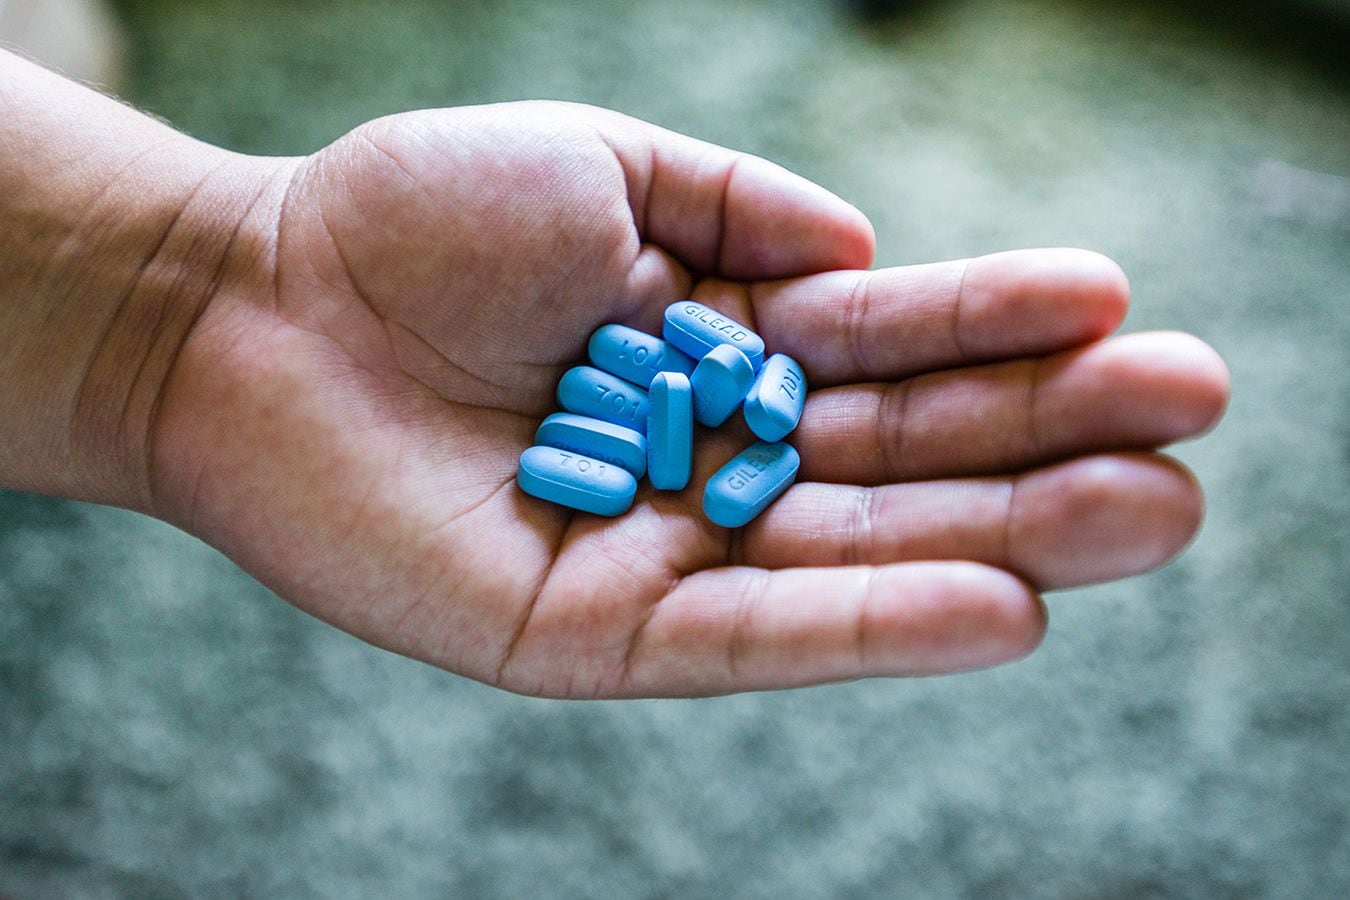 Truvada is a Gilead PrEP medication used to prevent HIV transmission.